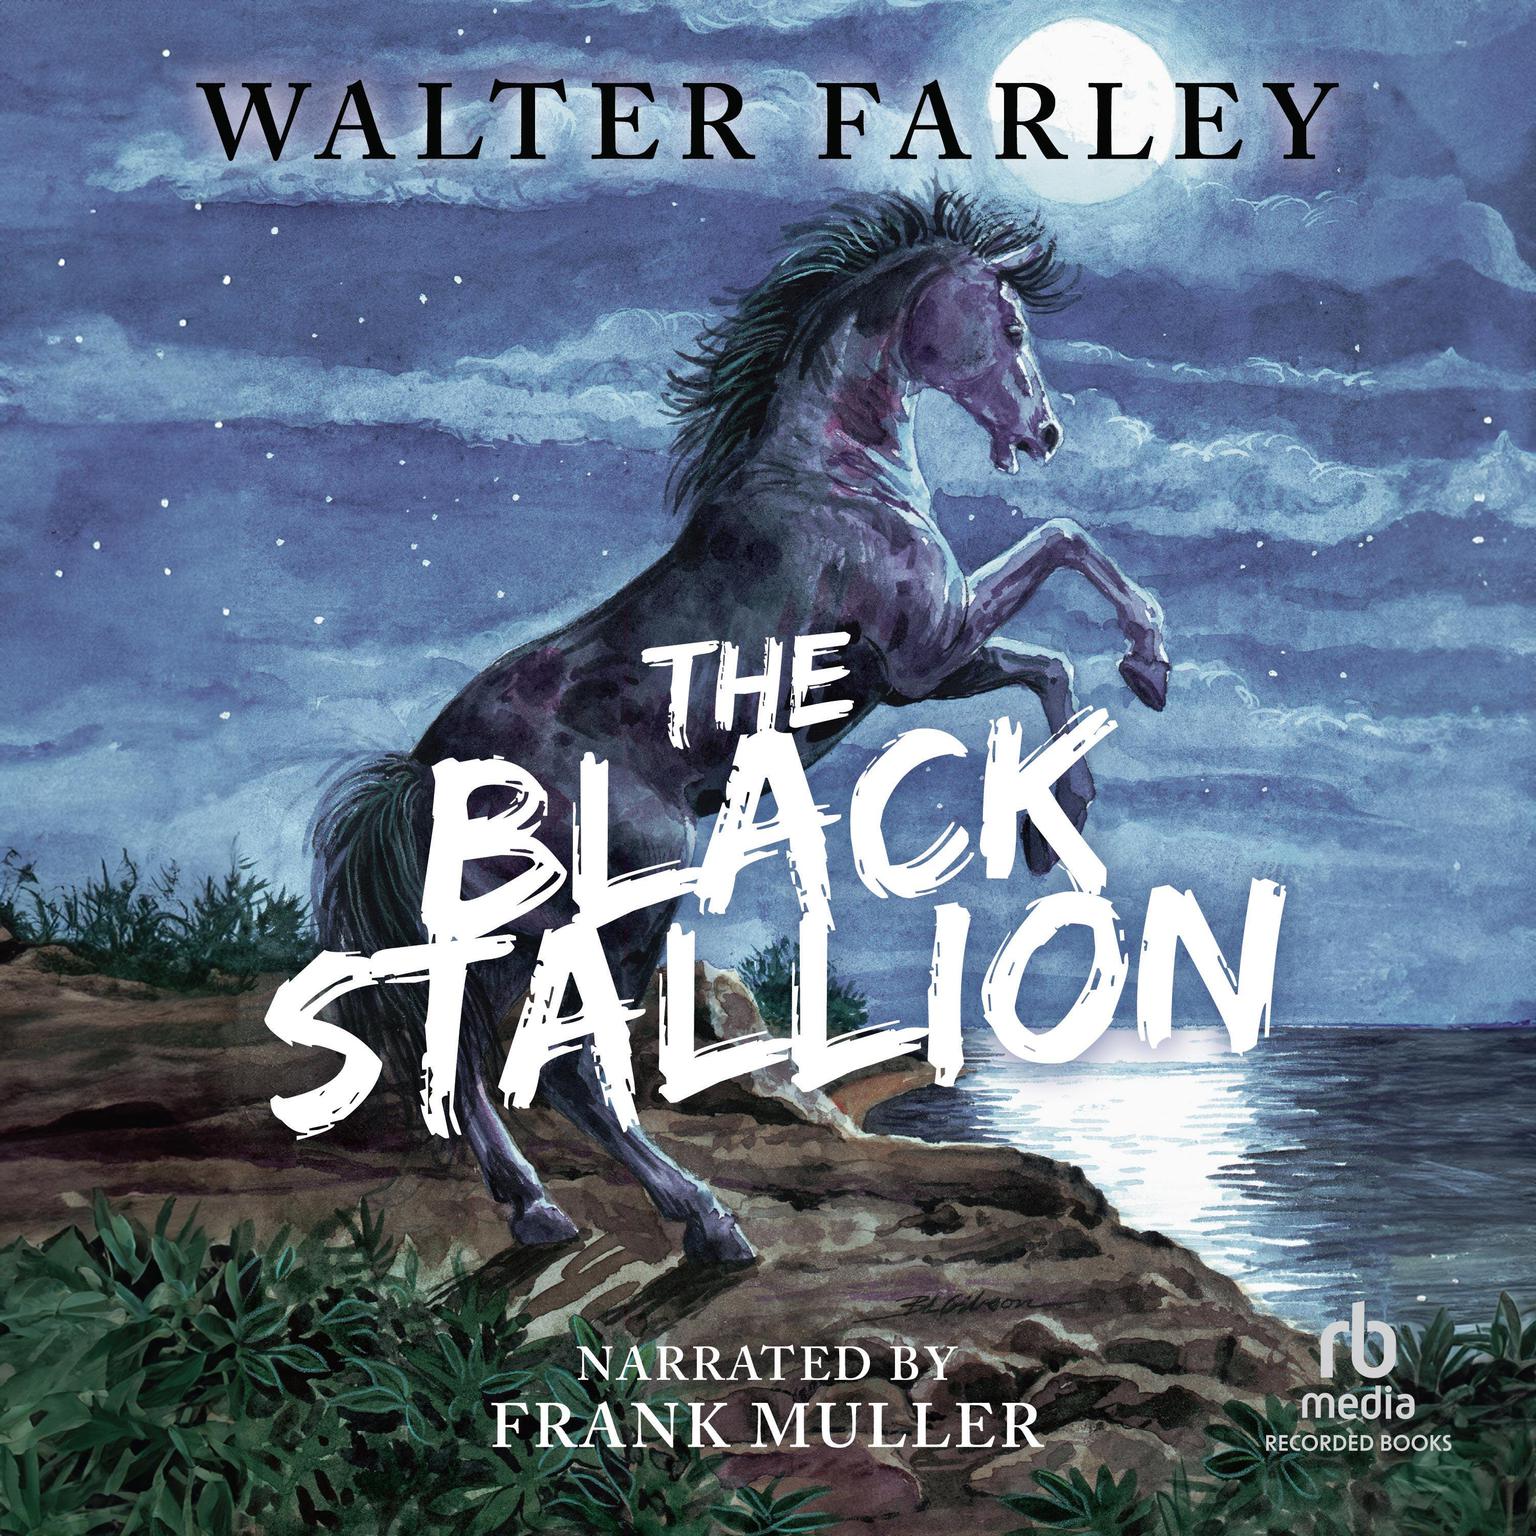 The Black Stallion Audiobook, by Walter Farley